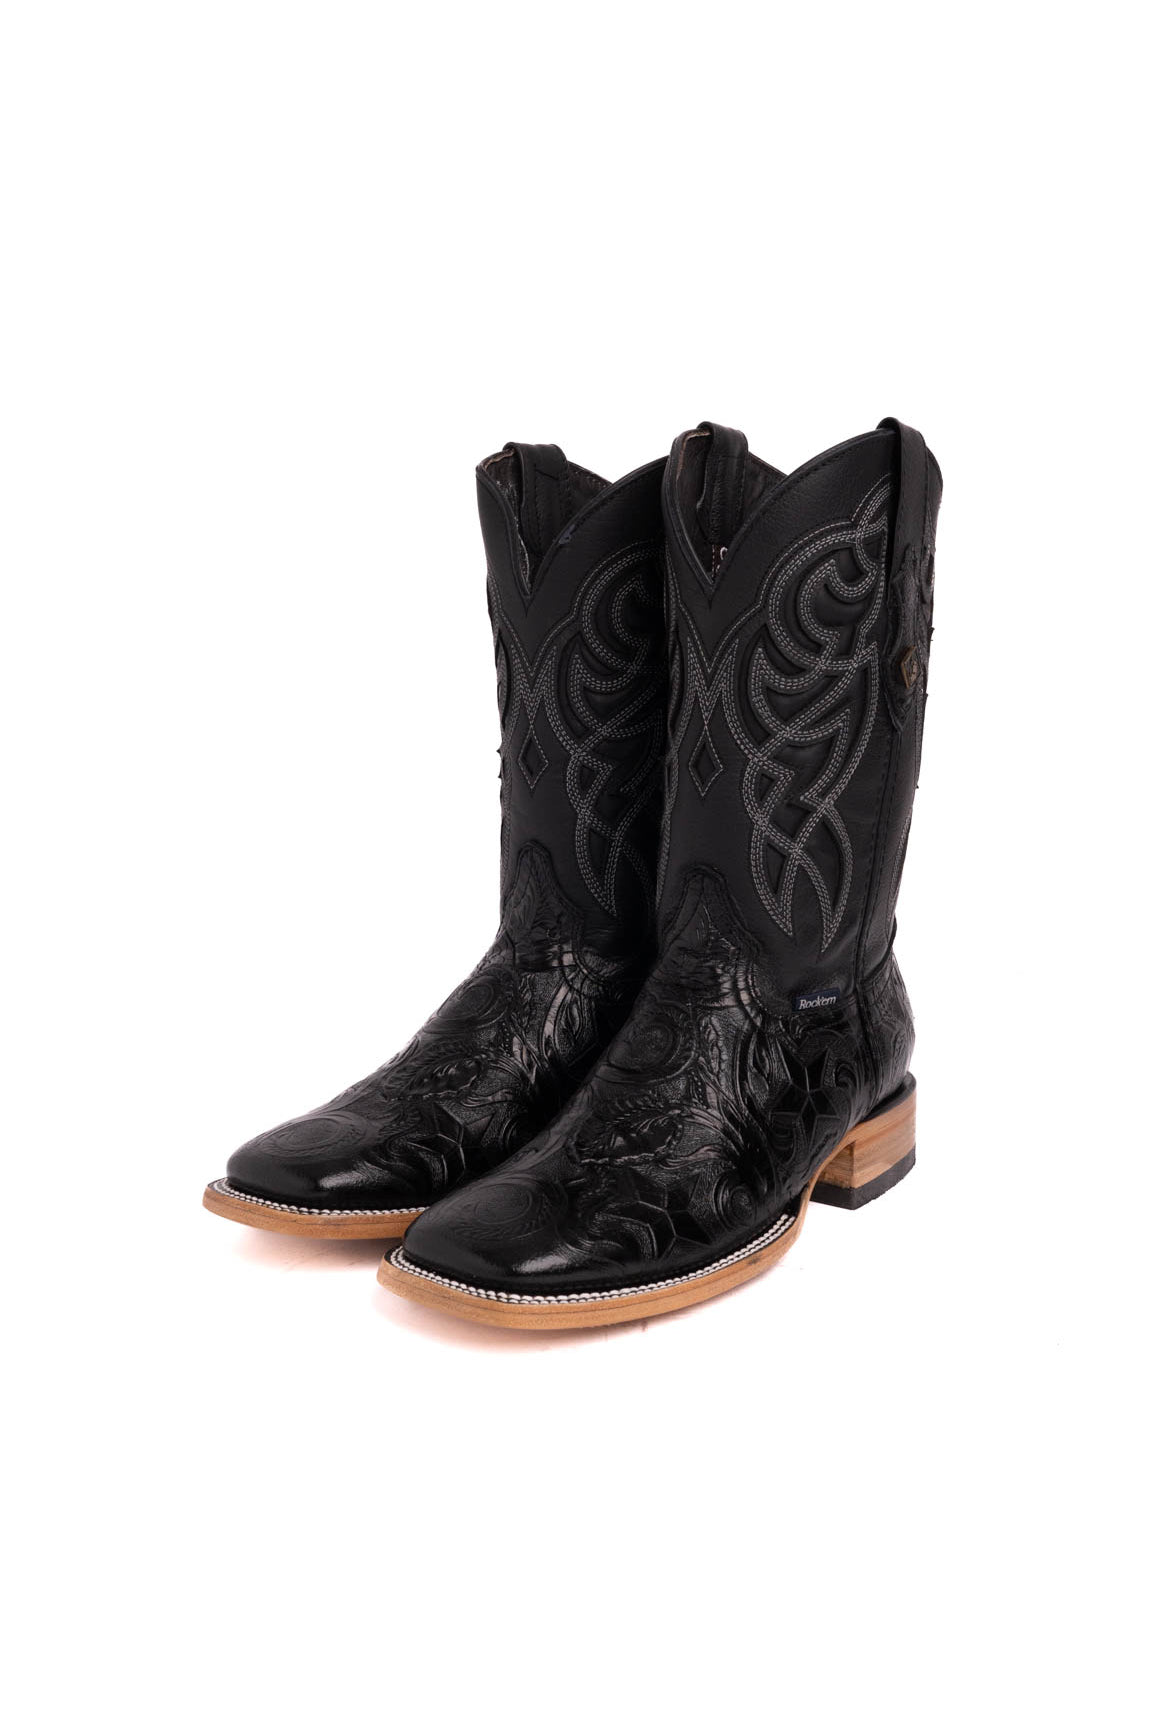 Print Star Hand Tooled Square Toe Cowboy Boot